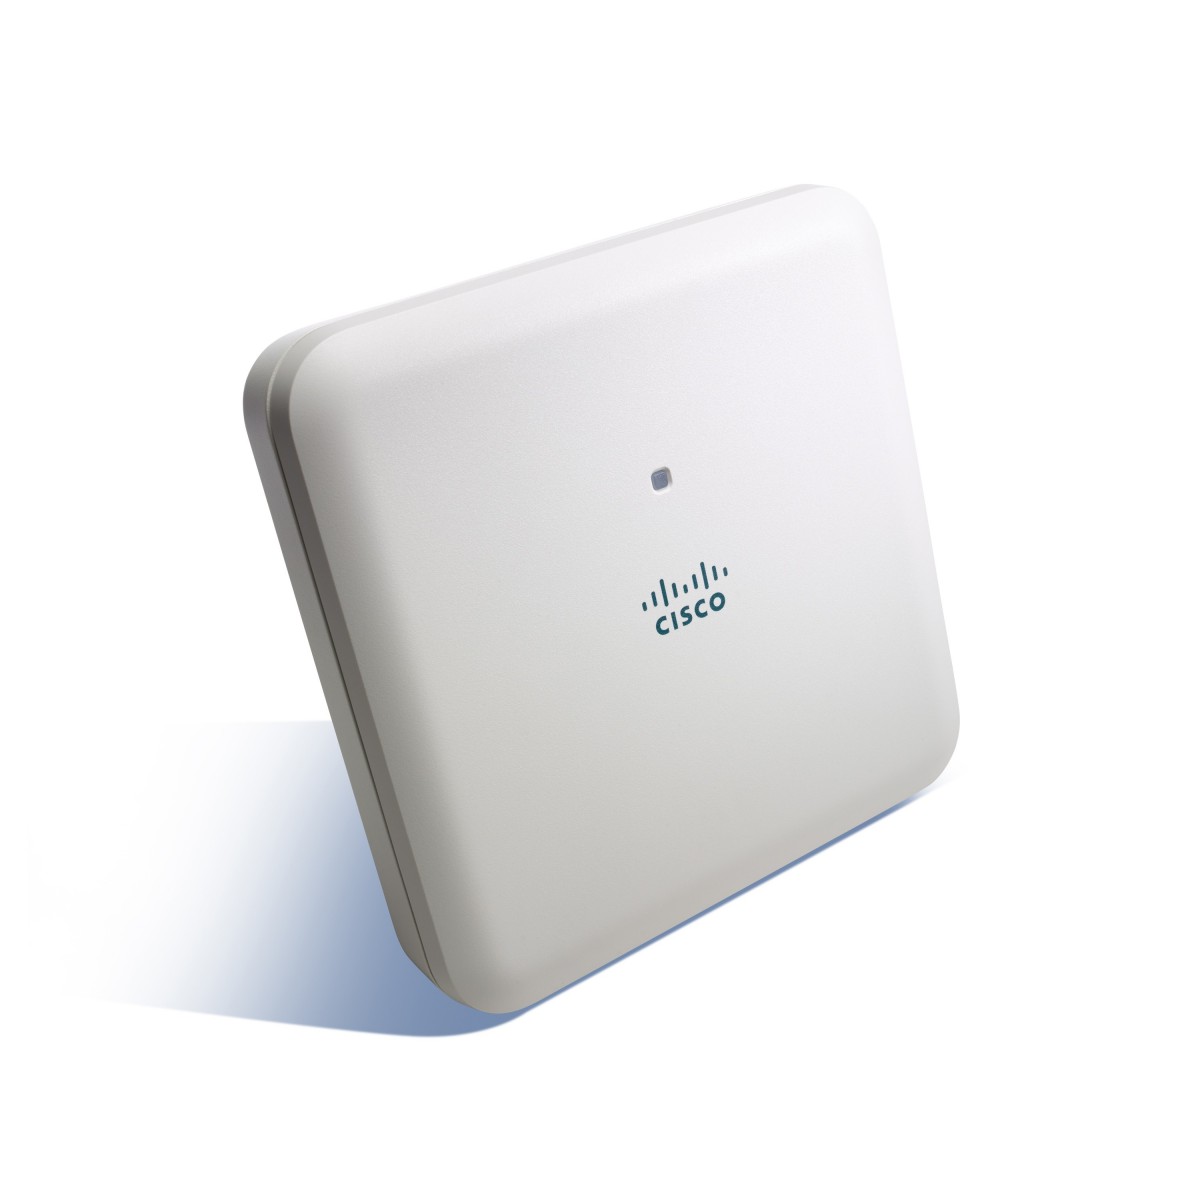 Cisco 1832I - Wireless Dual Band 802.11AC Access Point - 866.7 Mbit/s - 10,100,1000 Mbit/s - 2.4 - 5 GHz - IEEE 802.11a,IEEE 802